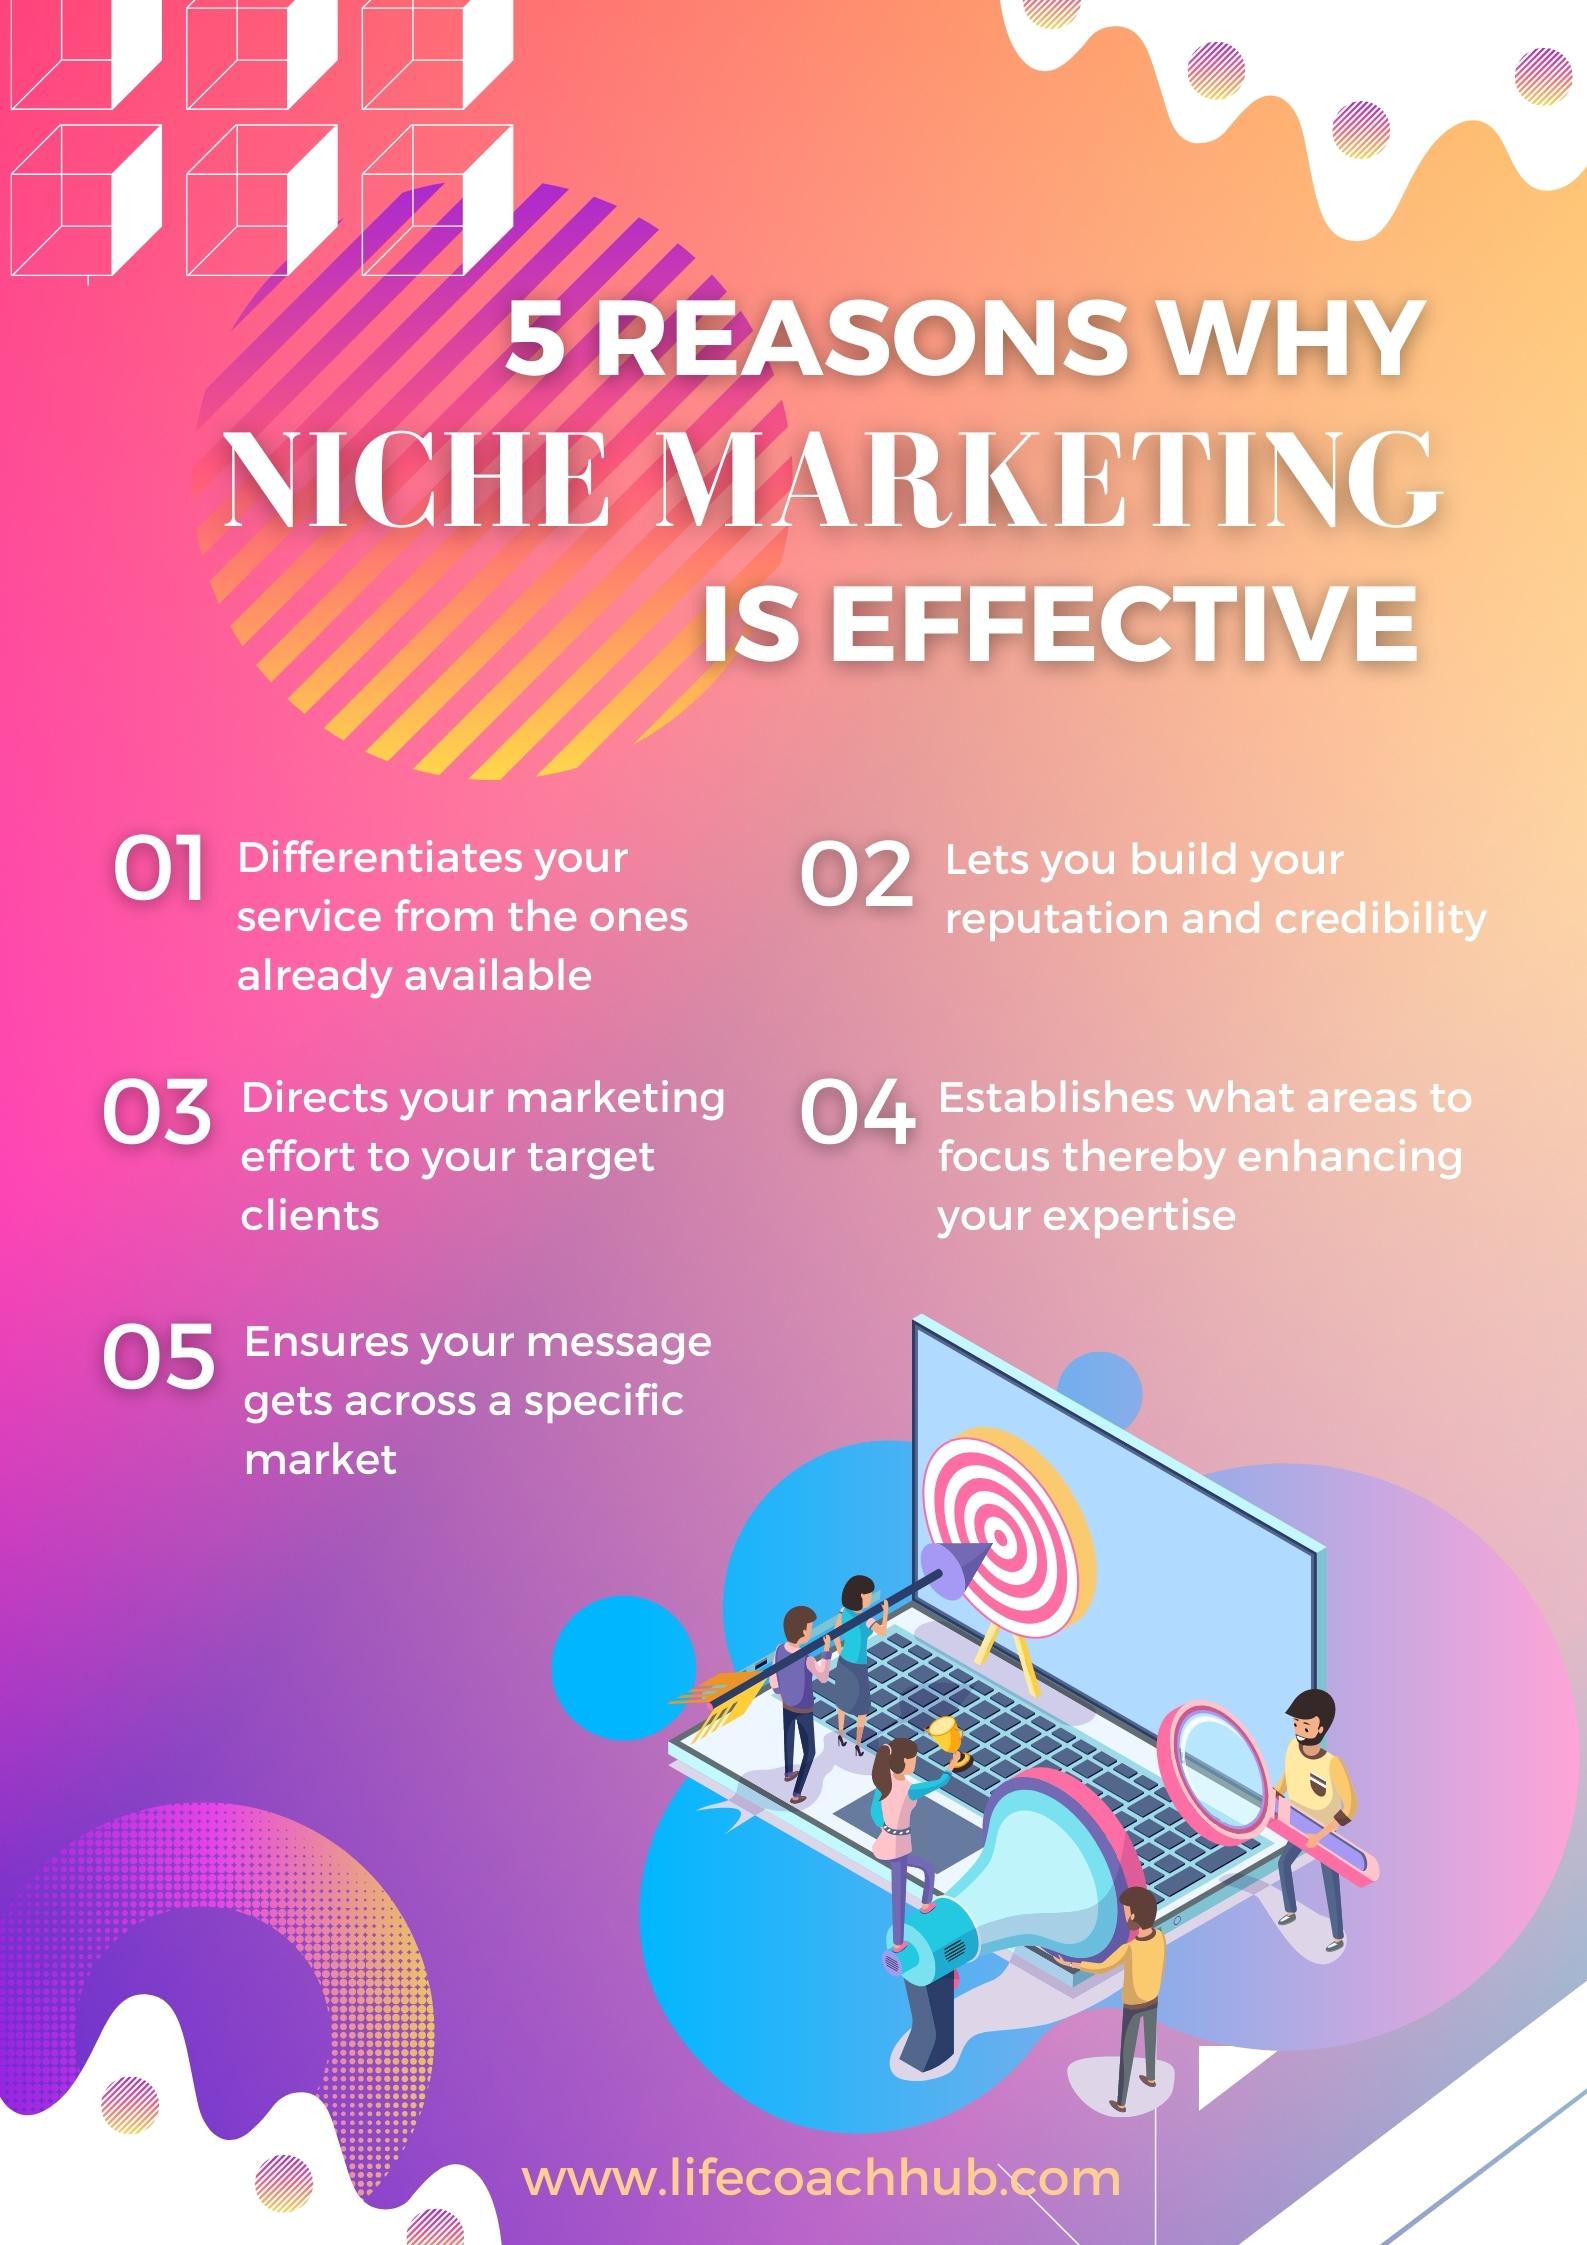 5 Reasons why niche marketing is effective